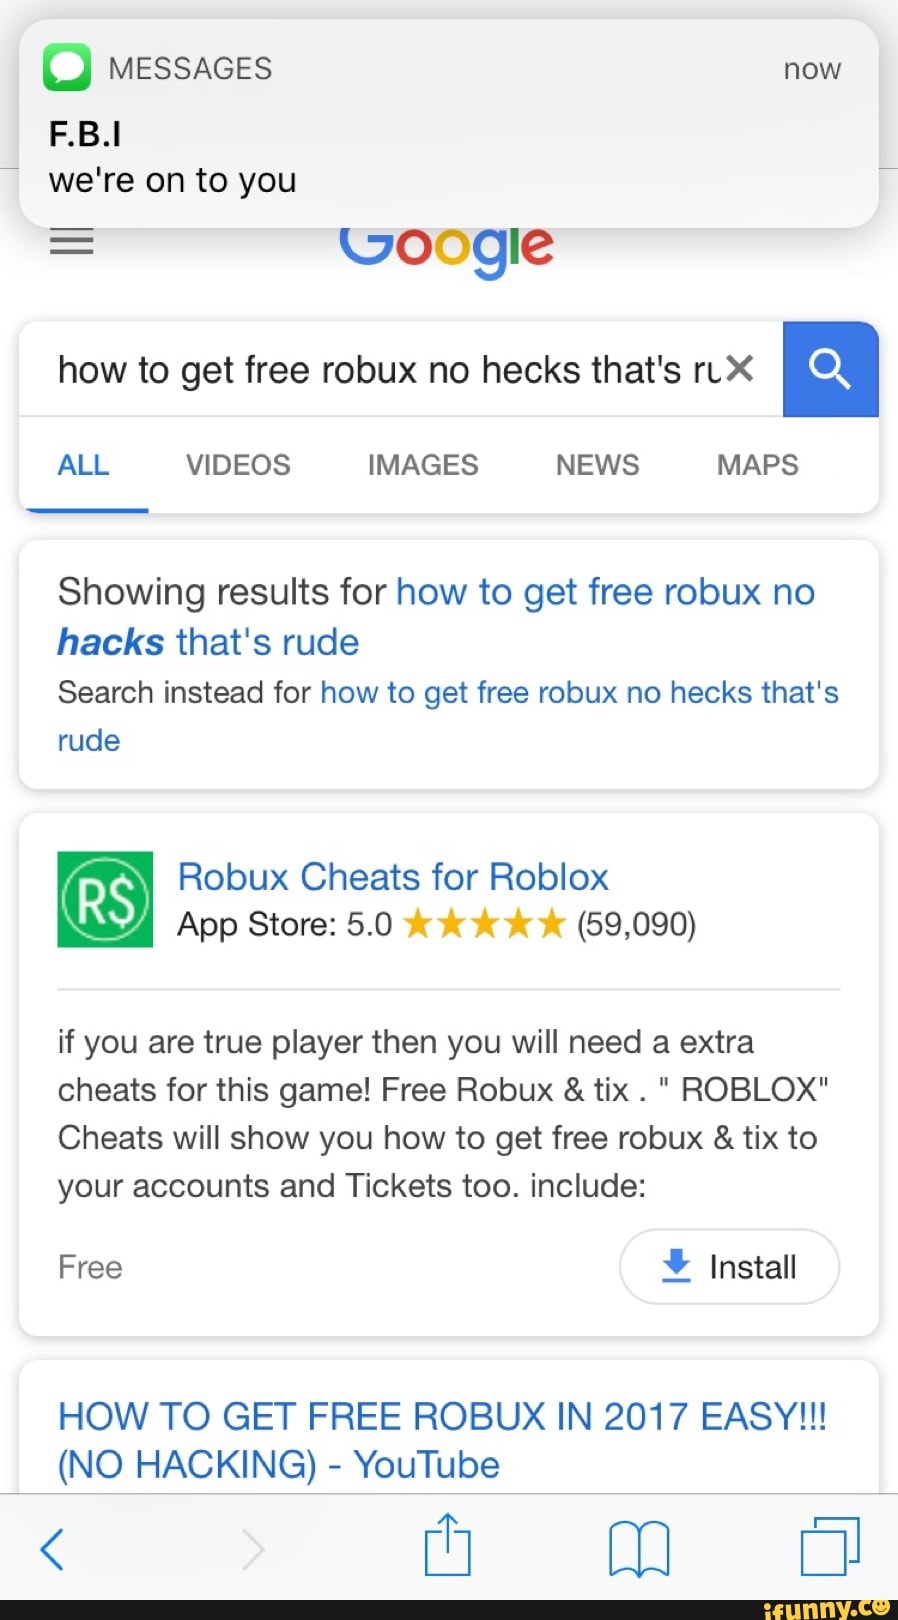 We Re On To You How To Get Free Robux No Hecks That S Rlx Showing Results For How To Get Free Robux No Hacks That S Rude Search Instead For How To